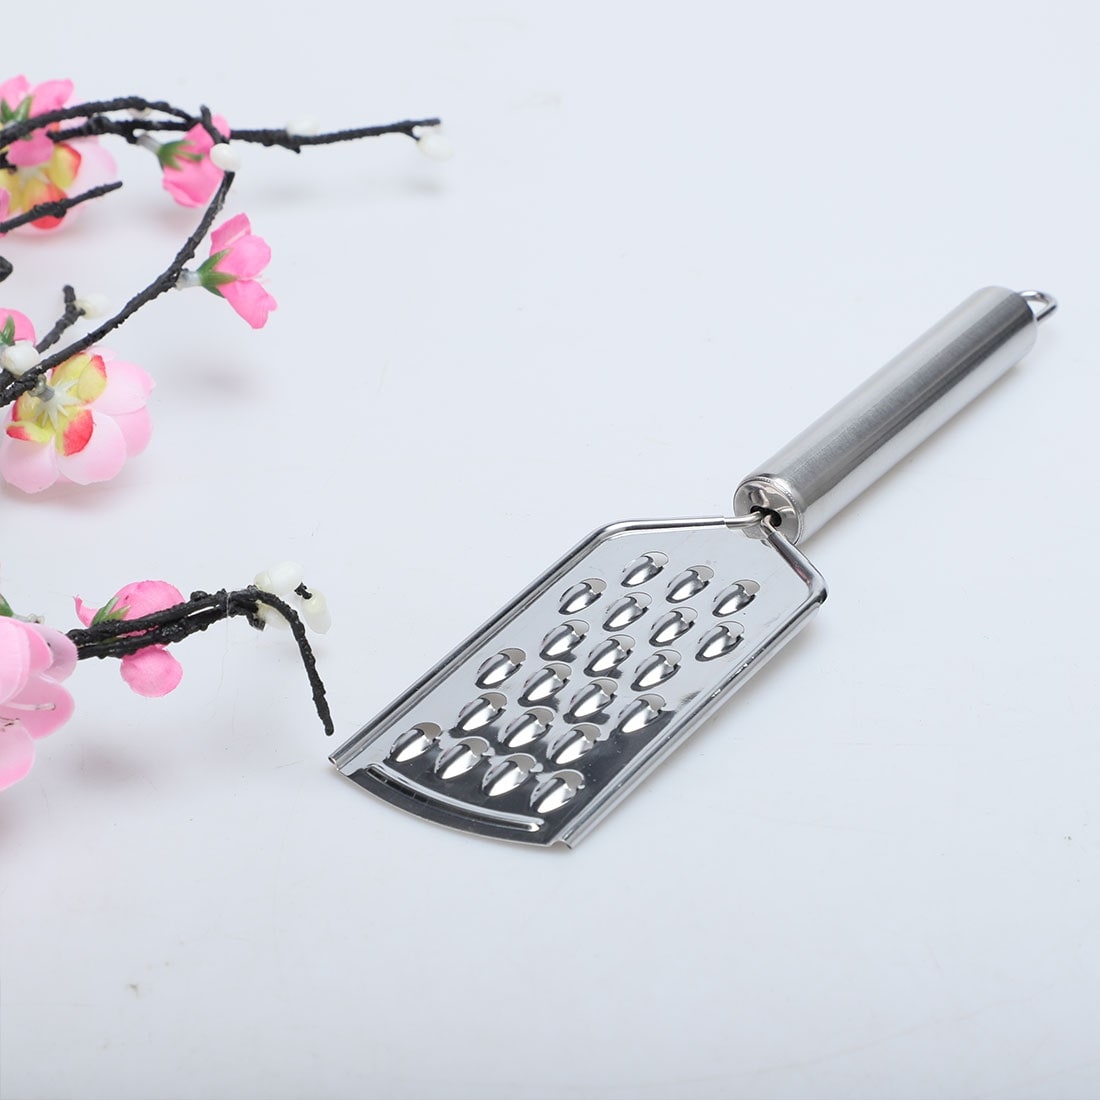 https://ak1.ostkcdn.com/images/products/is/images/direct/48d4de00ecf98b122cd9235d6efaf6a0f1d97686/Stainless-Steel-Cheese-Grater-Fruit-Flat-Vegetable-Grater-for-Restaurant.jpg